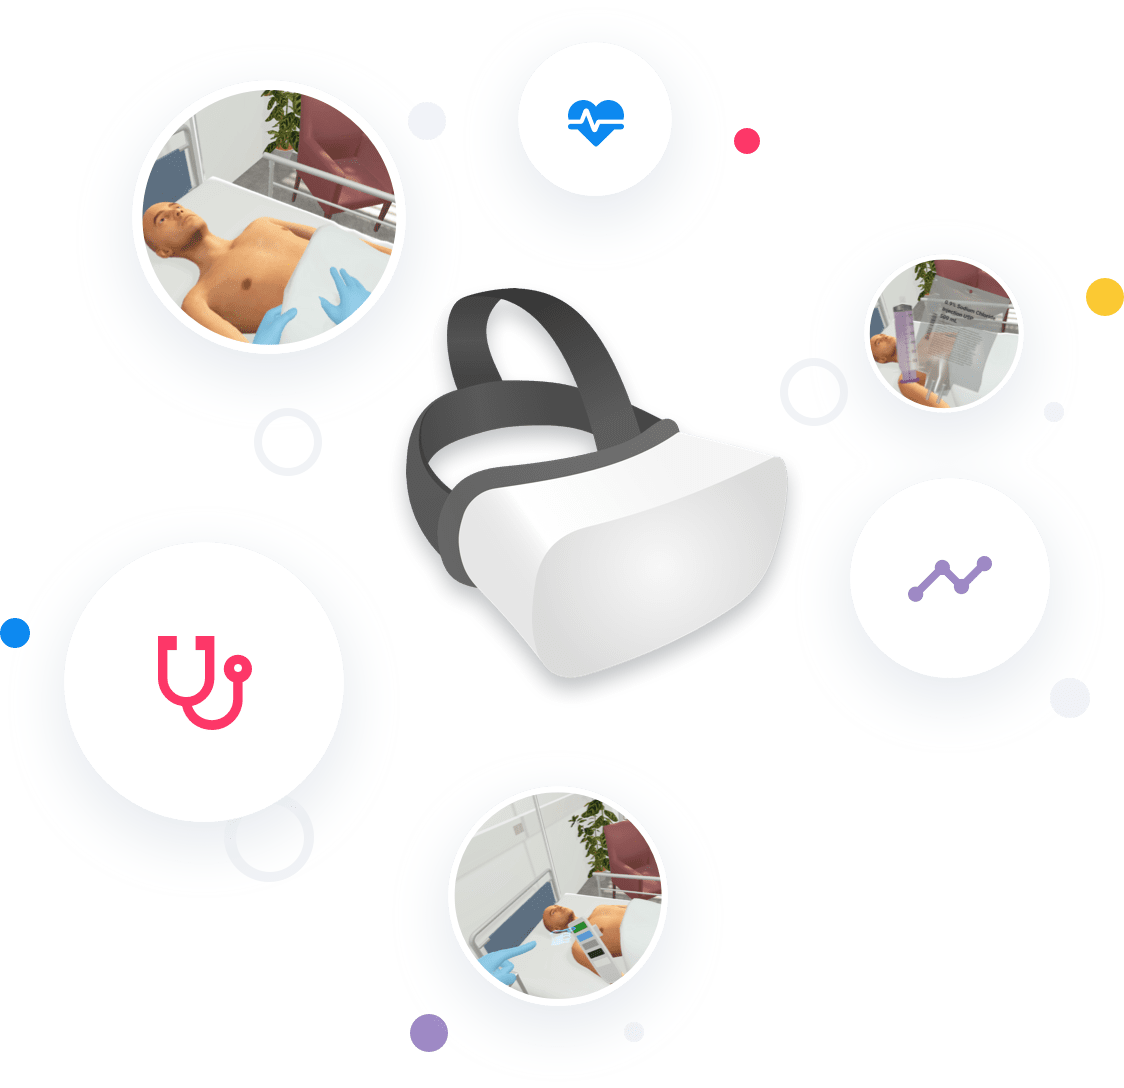 Partners - VR TRAINER